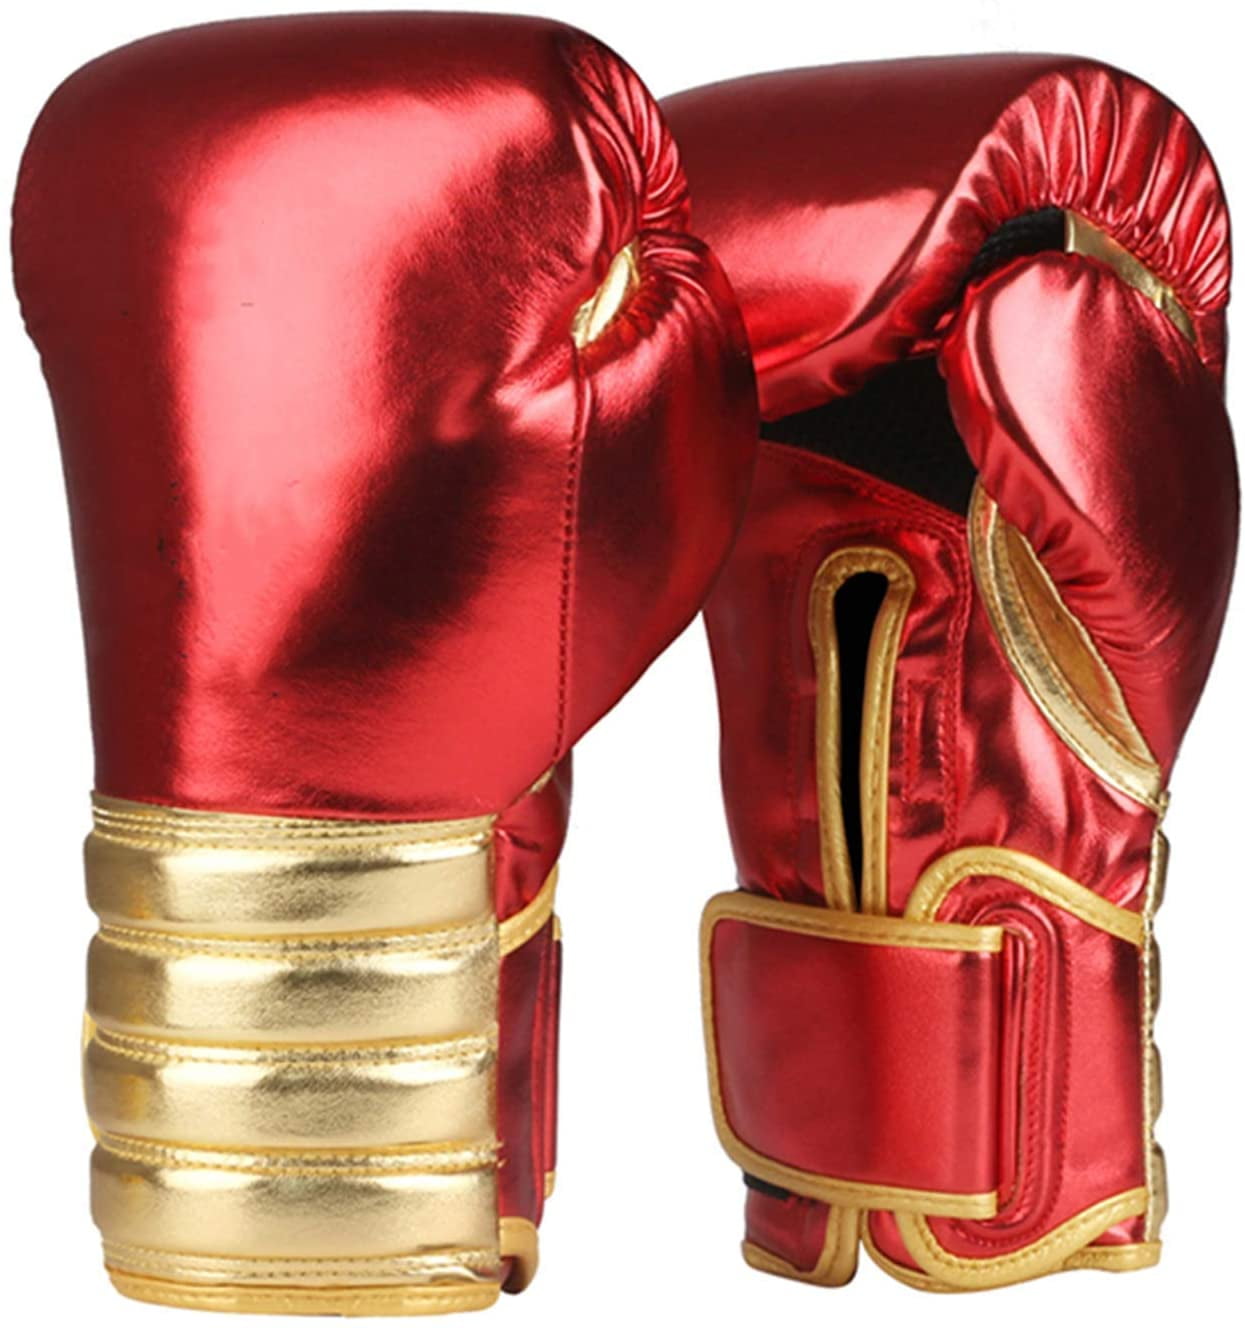 MMA Muay Thai Sparring Boxing Gloves Half Mitts Kickboxing Punching Bag Workout 